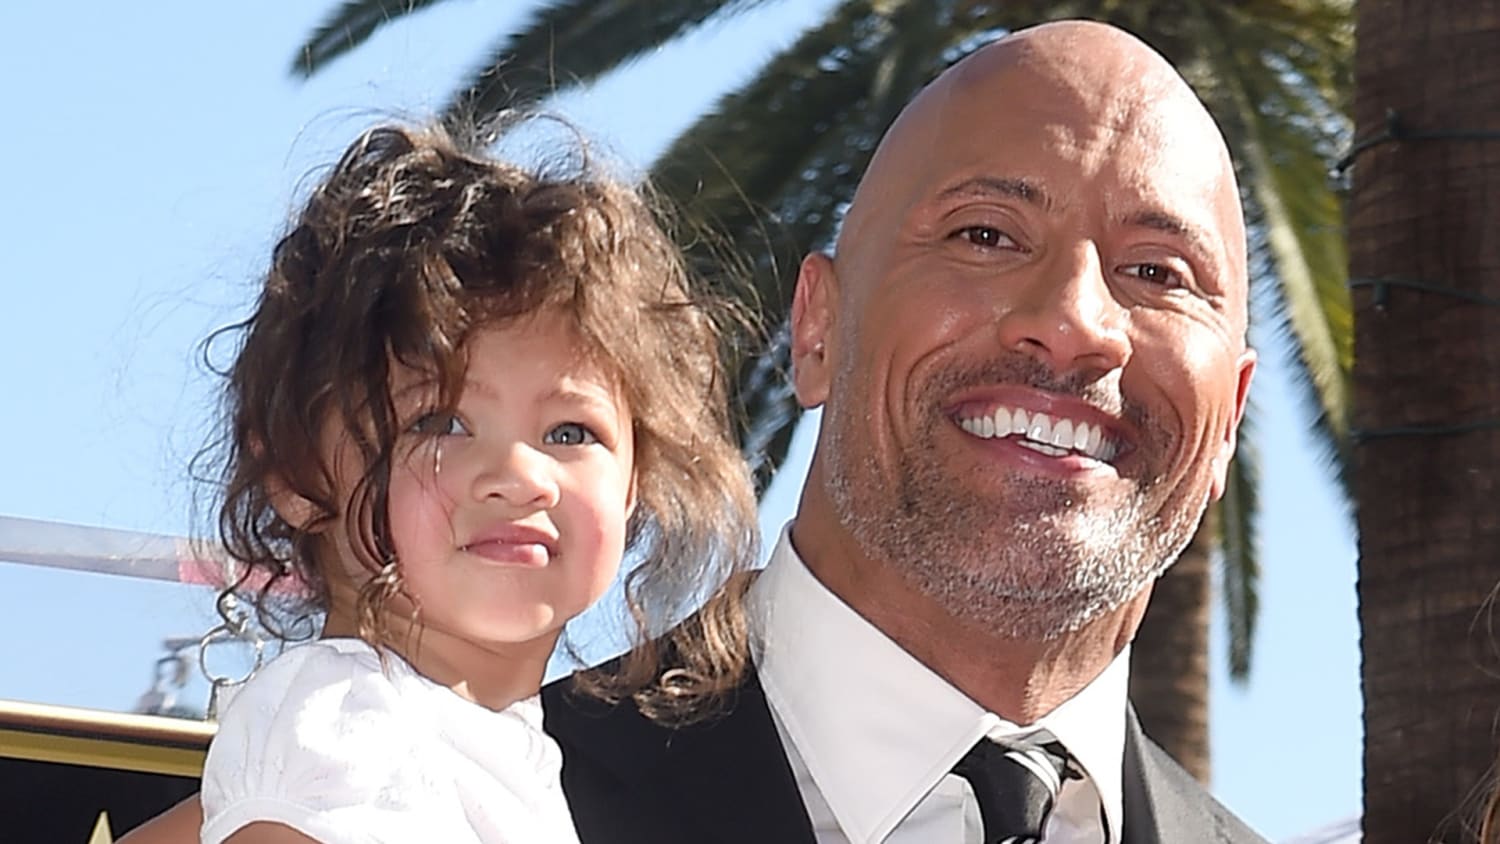 In a Father's Day video, Dwayne Johnson declares that being a father is his "most important" and "favorite" job.